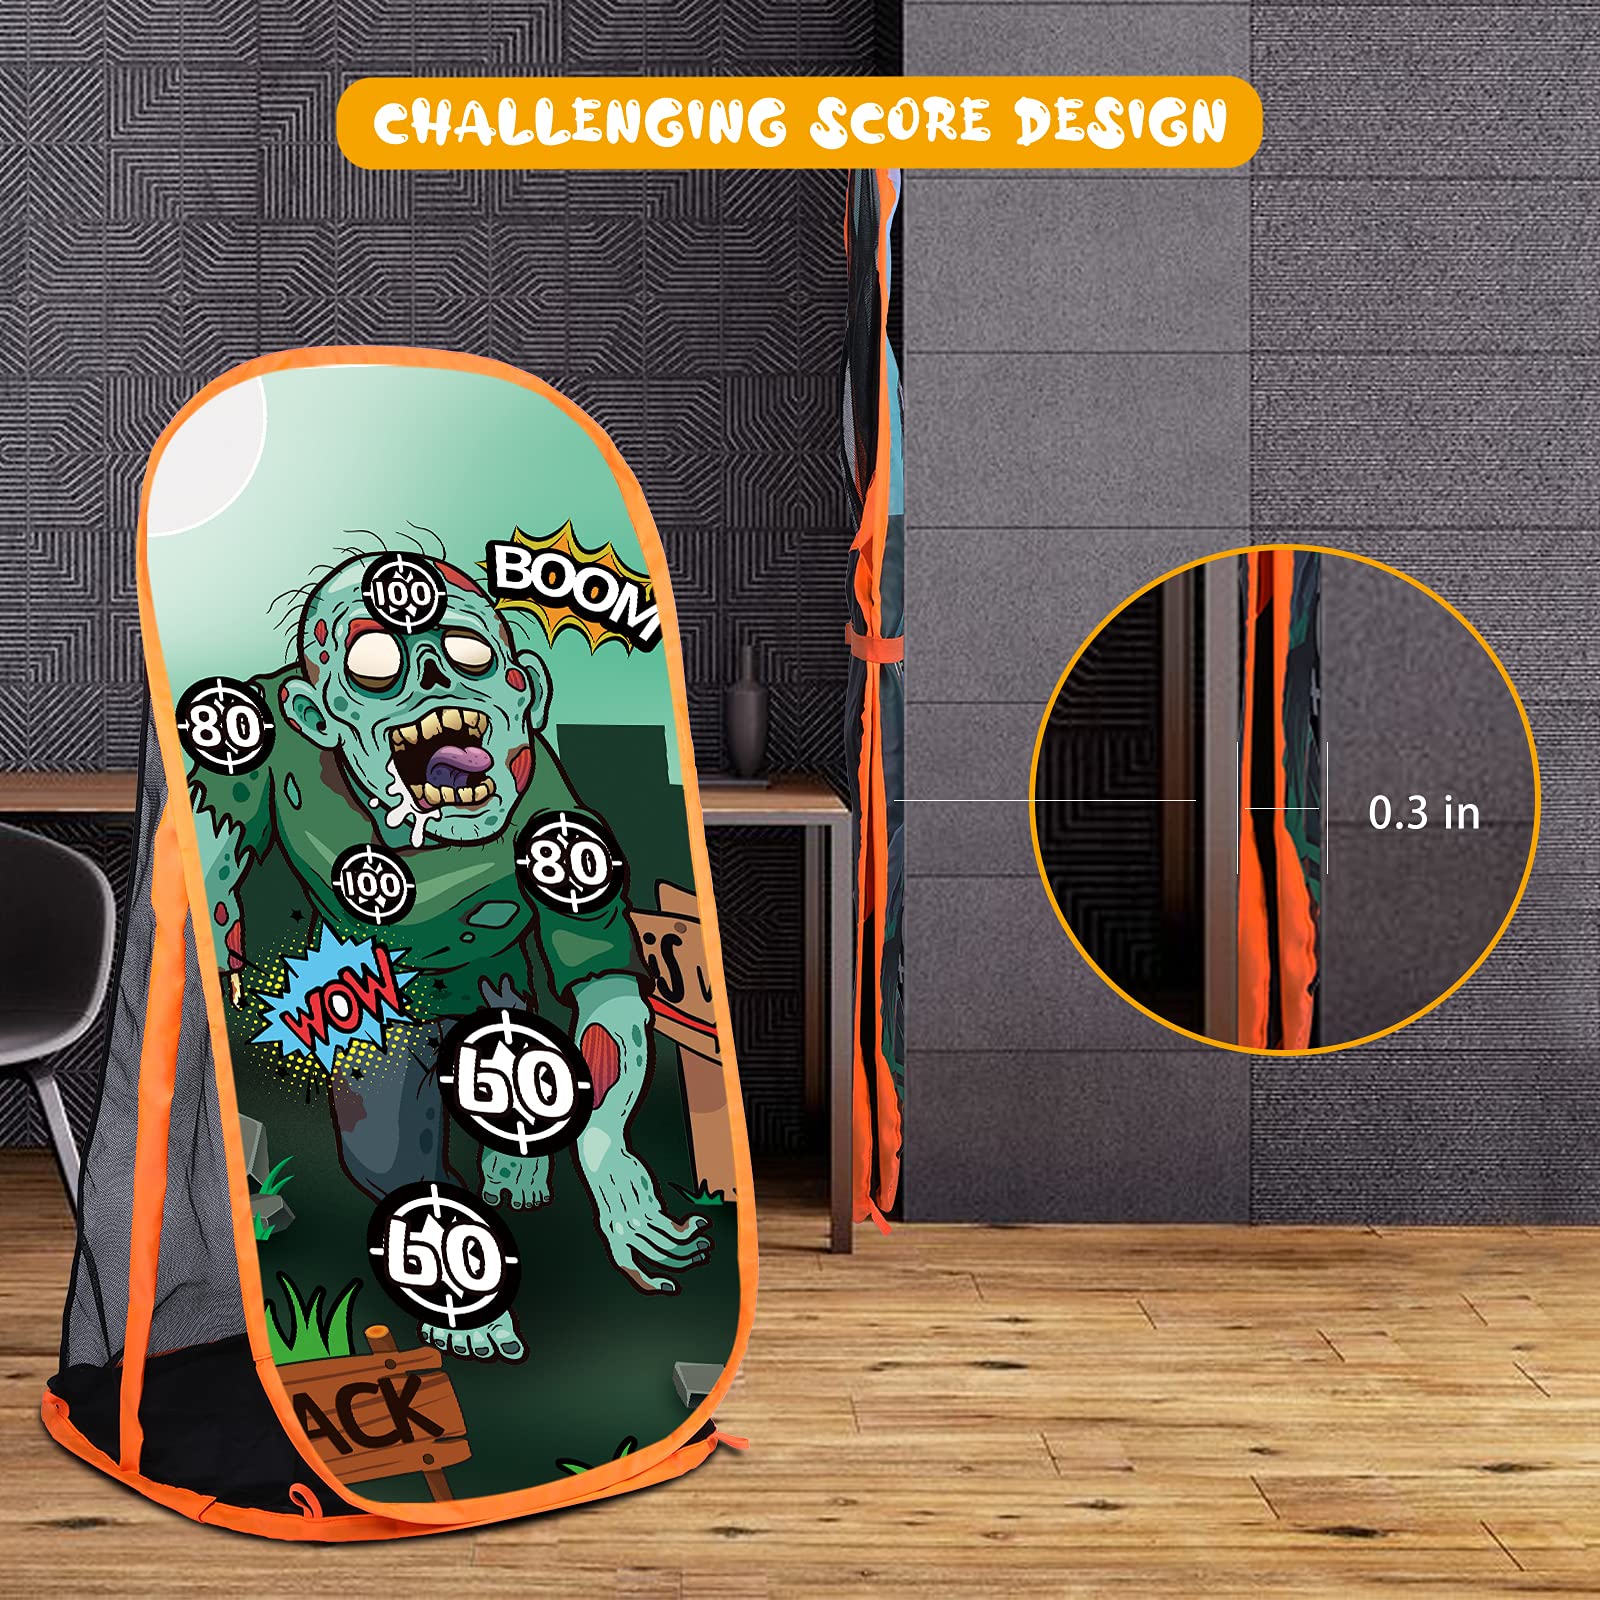 RONSTONE Shooting Practice Target Compatible with Nerf Gun for Boys Girls, Toy Foam Blaster Shooting Targets for Kids Indoor Outdoor, Zombie Shooting Target with Storage Net